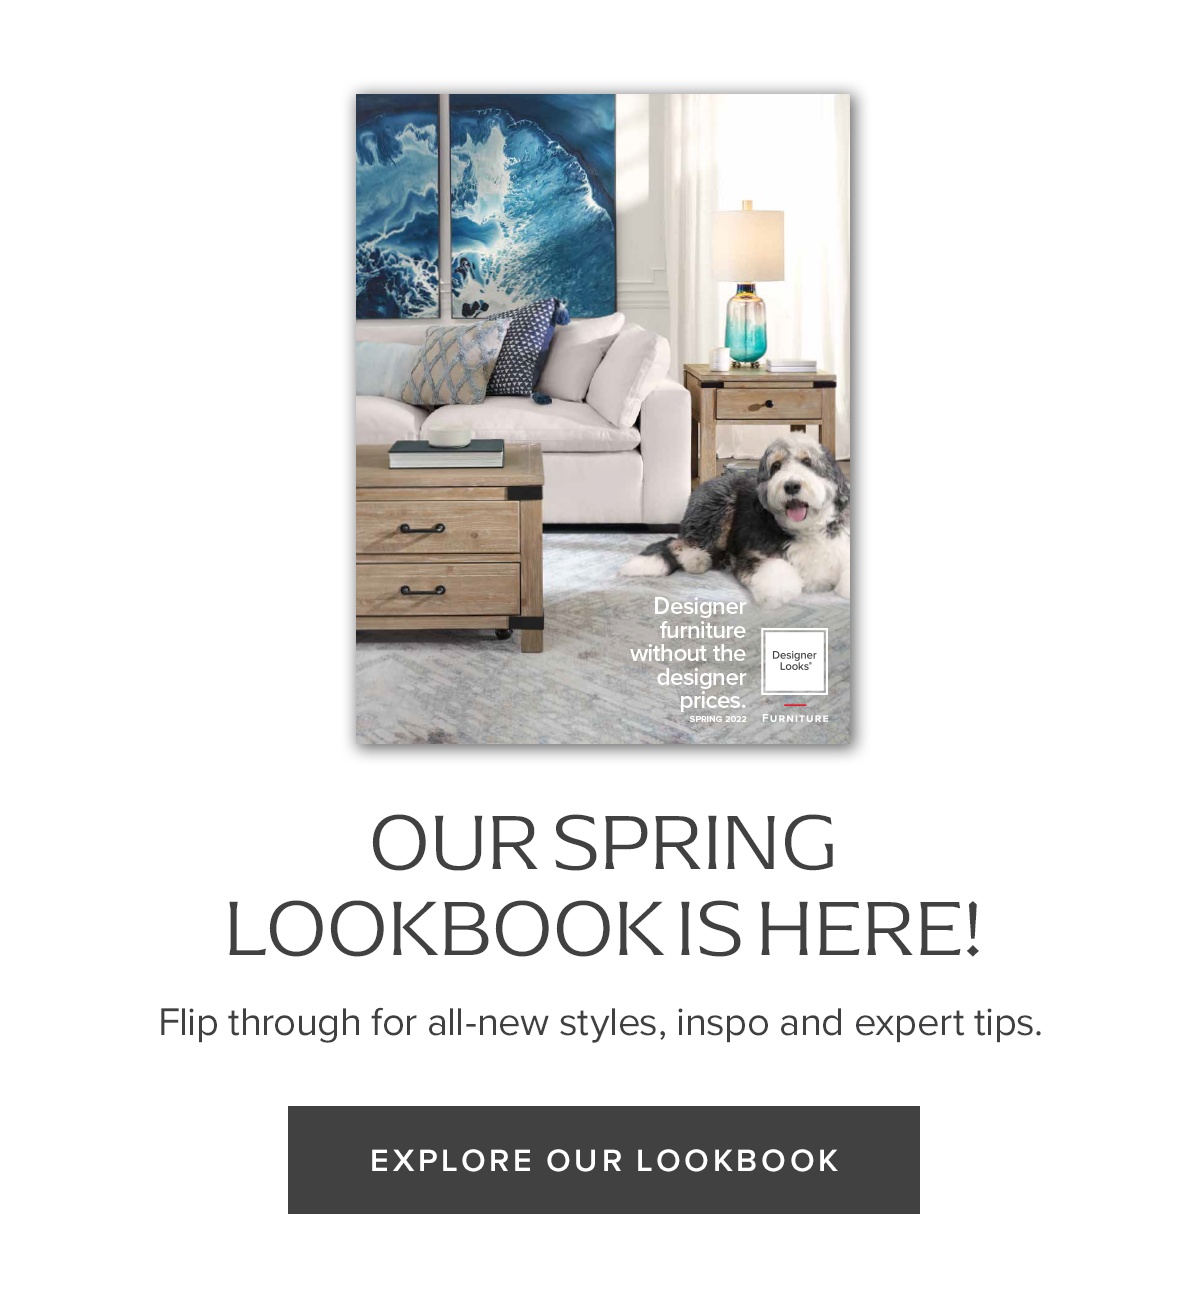 Our Spring Lookbook is Here!